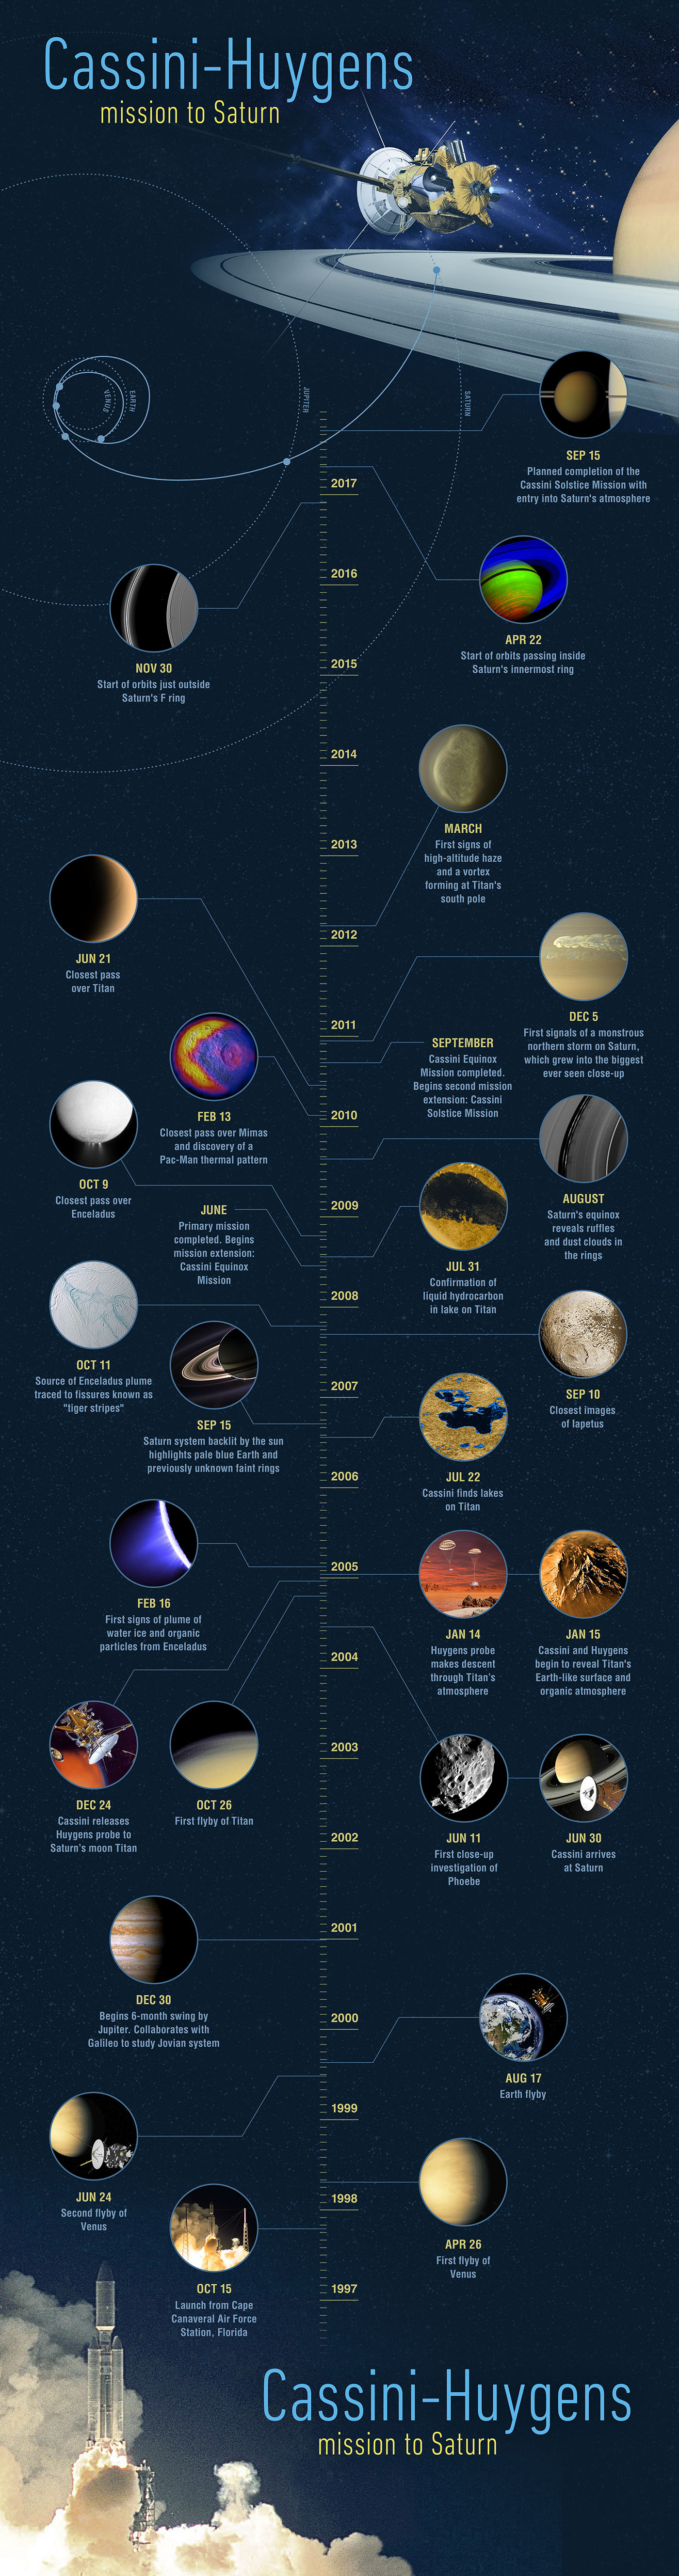 This illustrated timeline features milestones in the journey of NASA's Cassini spacecraft. Scroll up to launch Cassini's voyage.